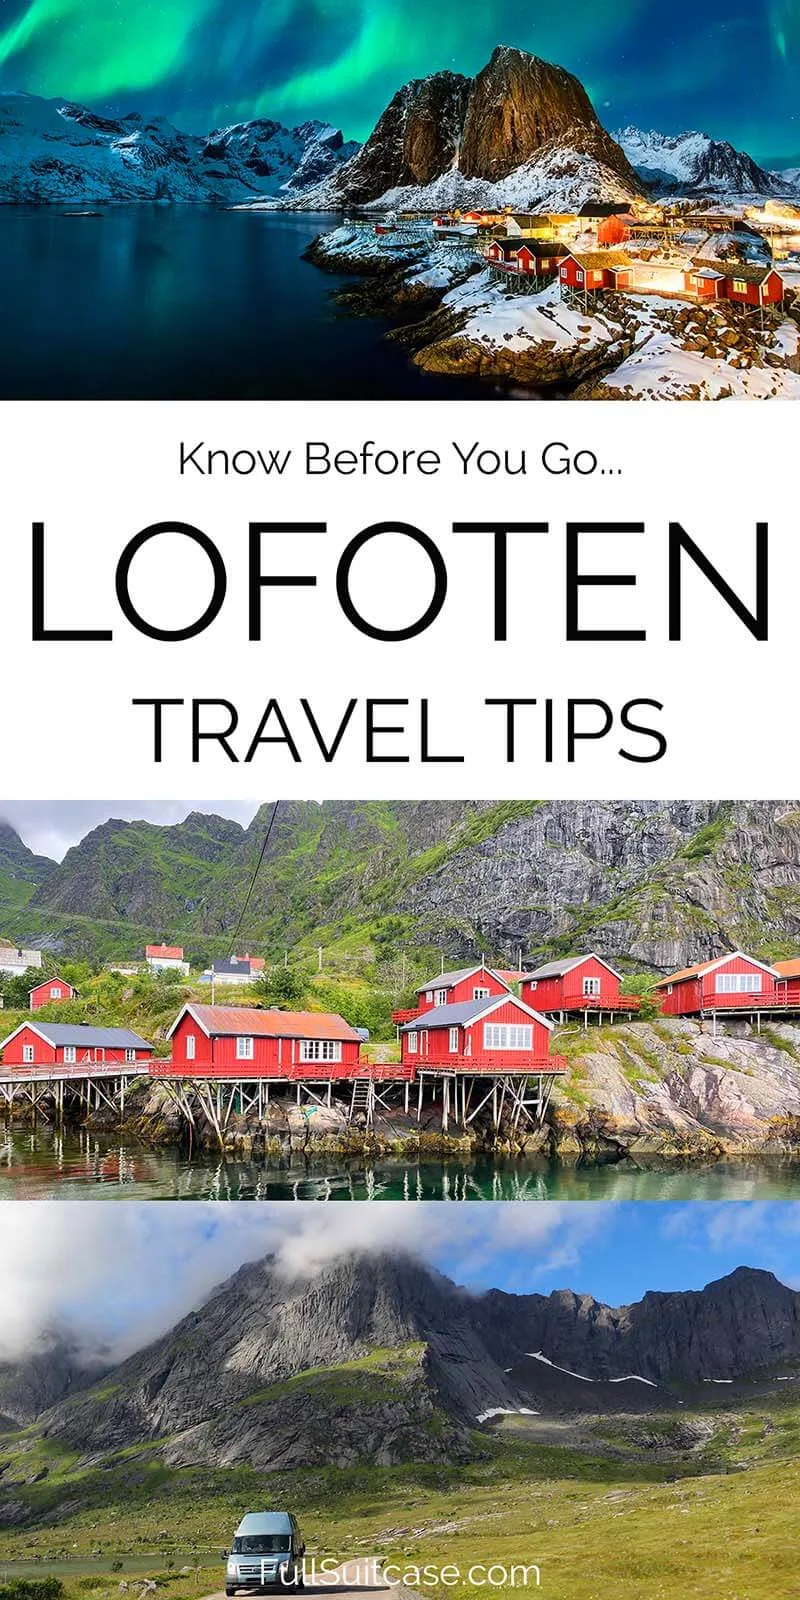 Lofoten travel tips and useful information for first time visitors to Lofoten Islands in Norway